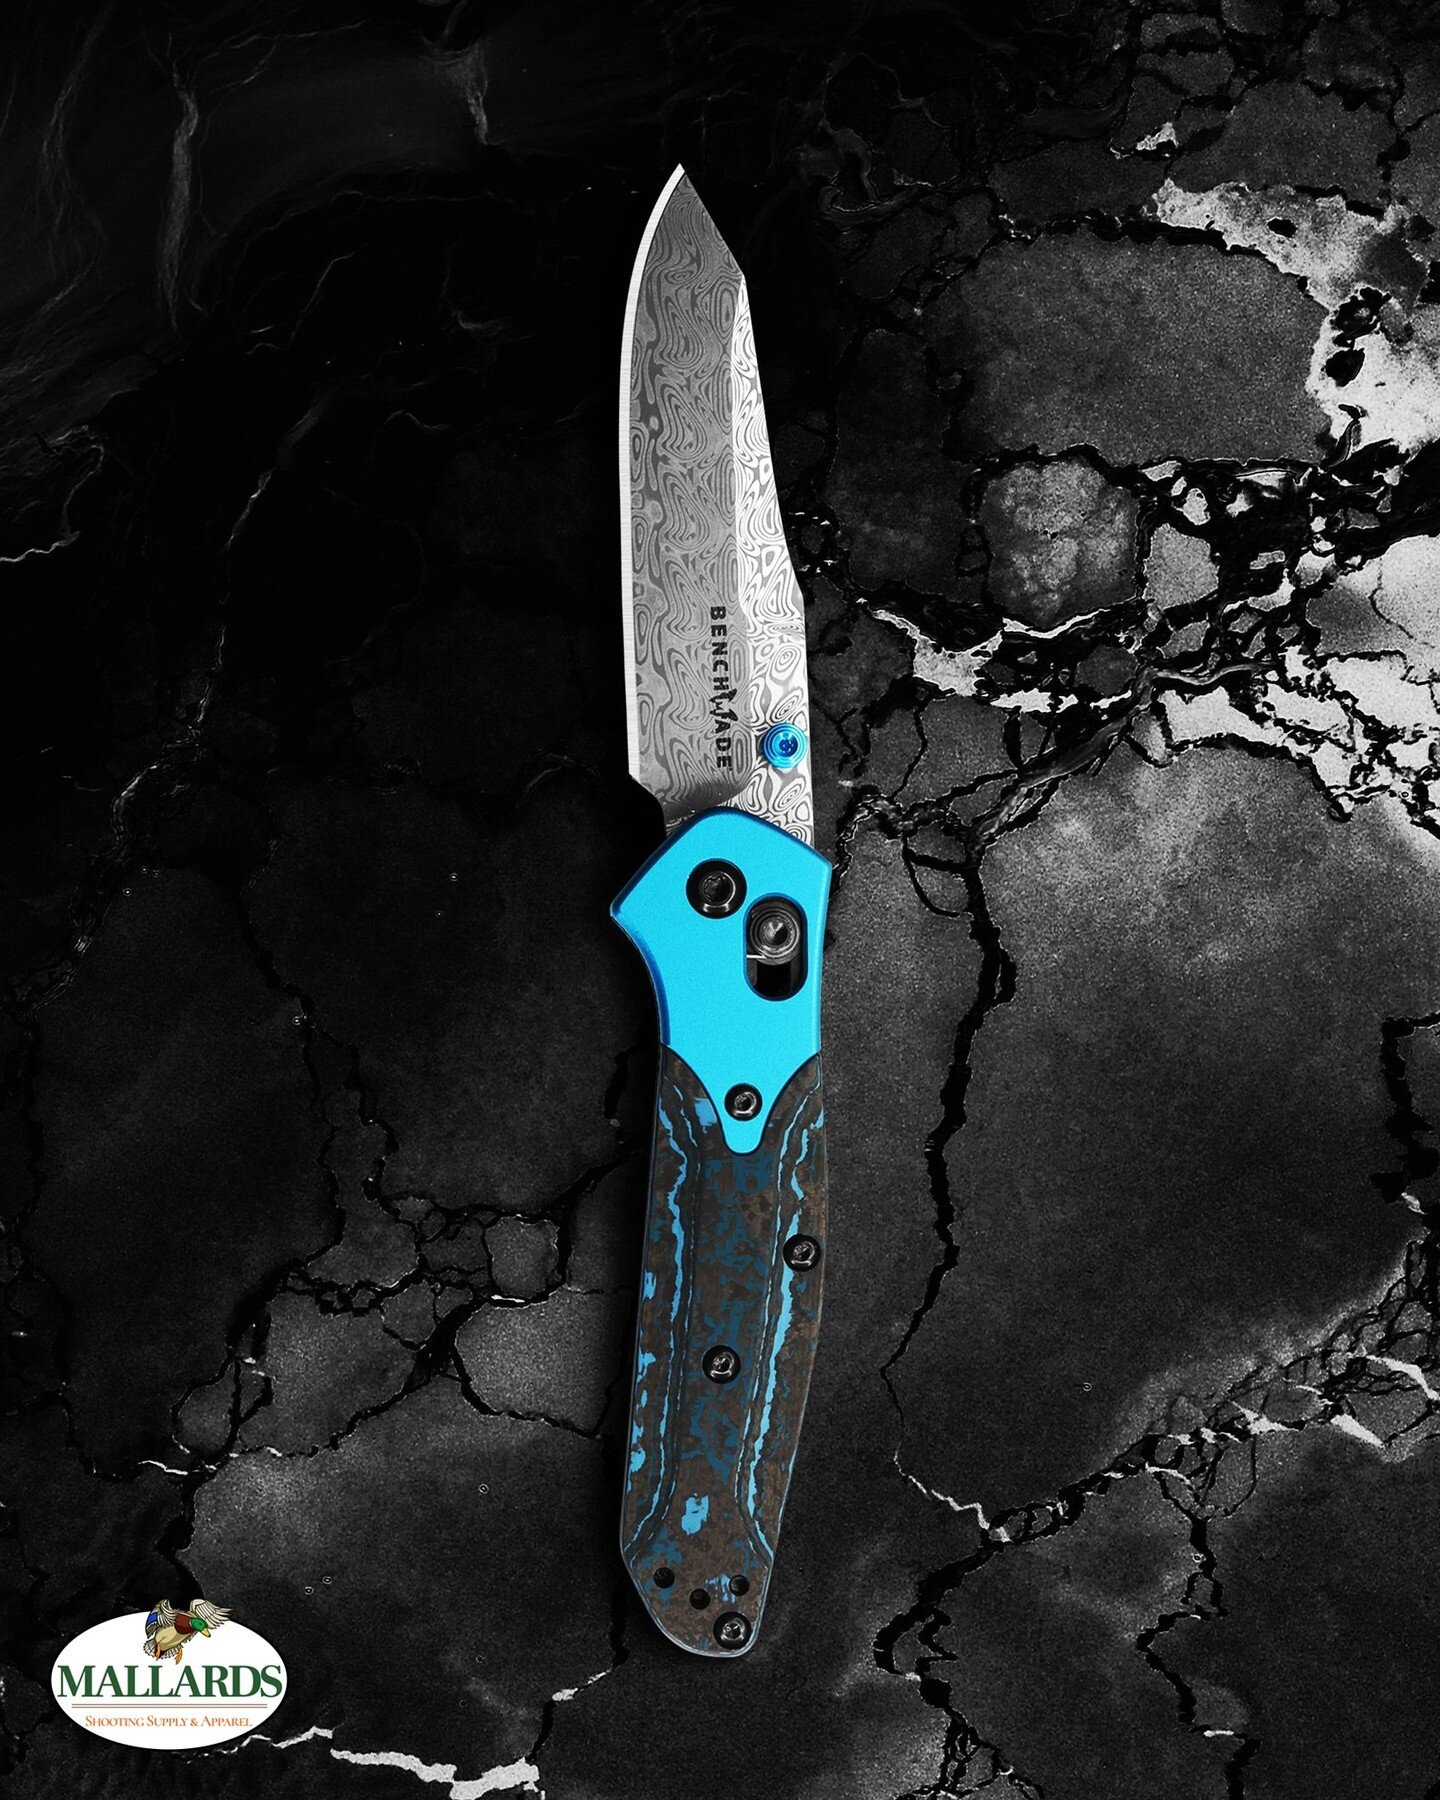 Fans and collectors of the Osborne family&mdash; one of Benchmade&rsquo;s most iconic designs&mdash;will notice the classic reverse tanto blade shape coupled with a brand-new pattern on the Damasteel&reg; blade. Called &AElig;gir&trade;, the pattern 